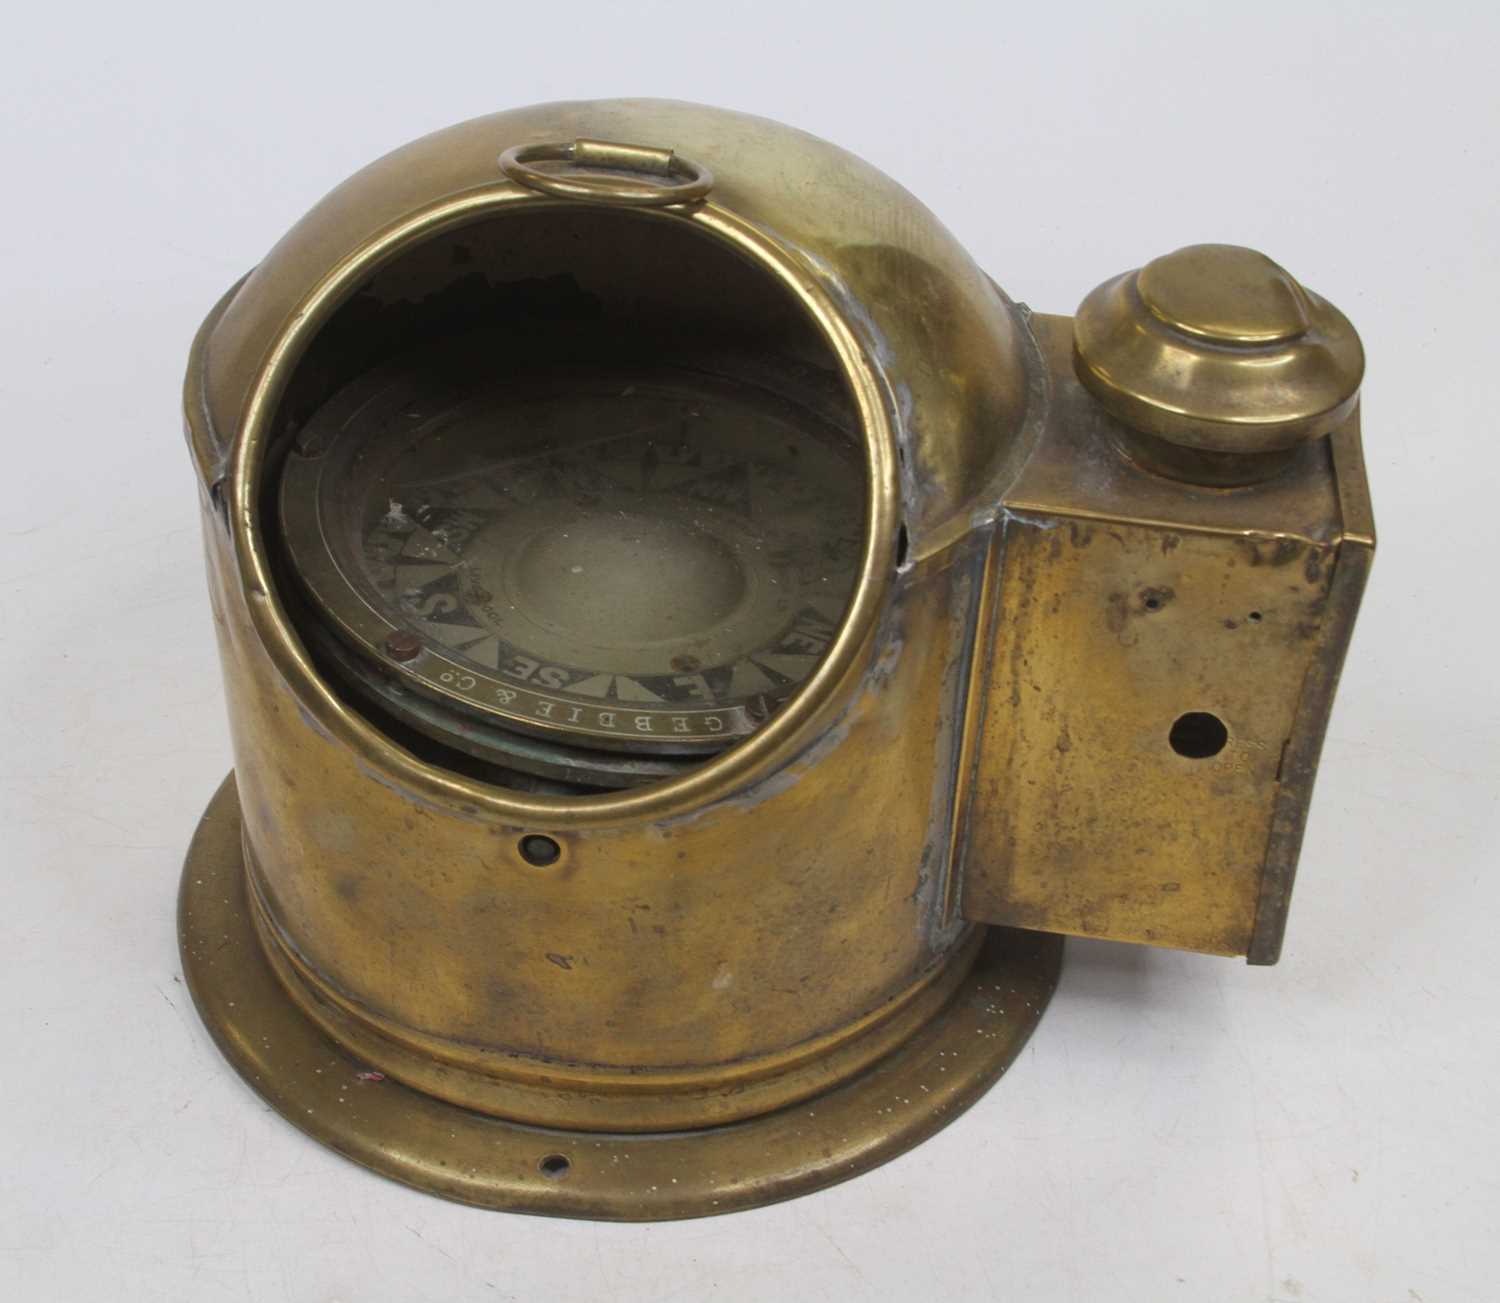 An early 20th century Gebbie & Co. gimbal mounted ship's compass, height 21cm